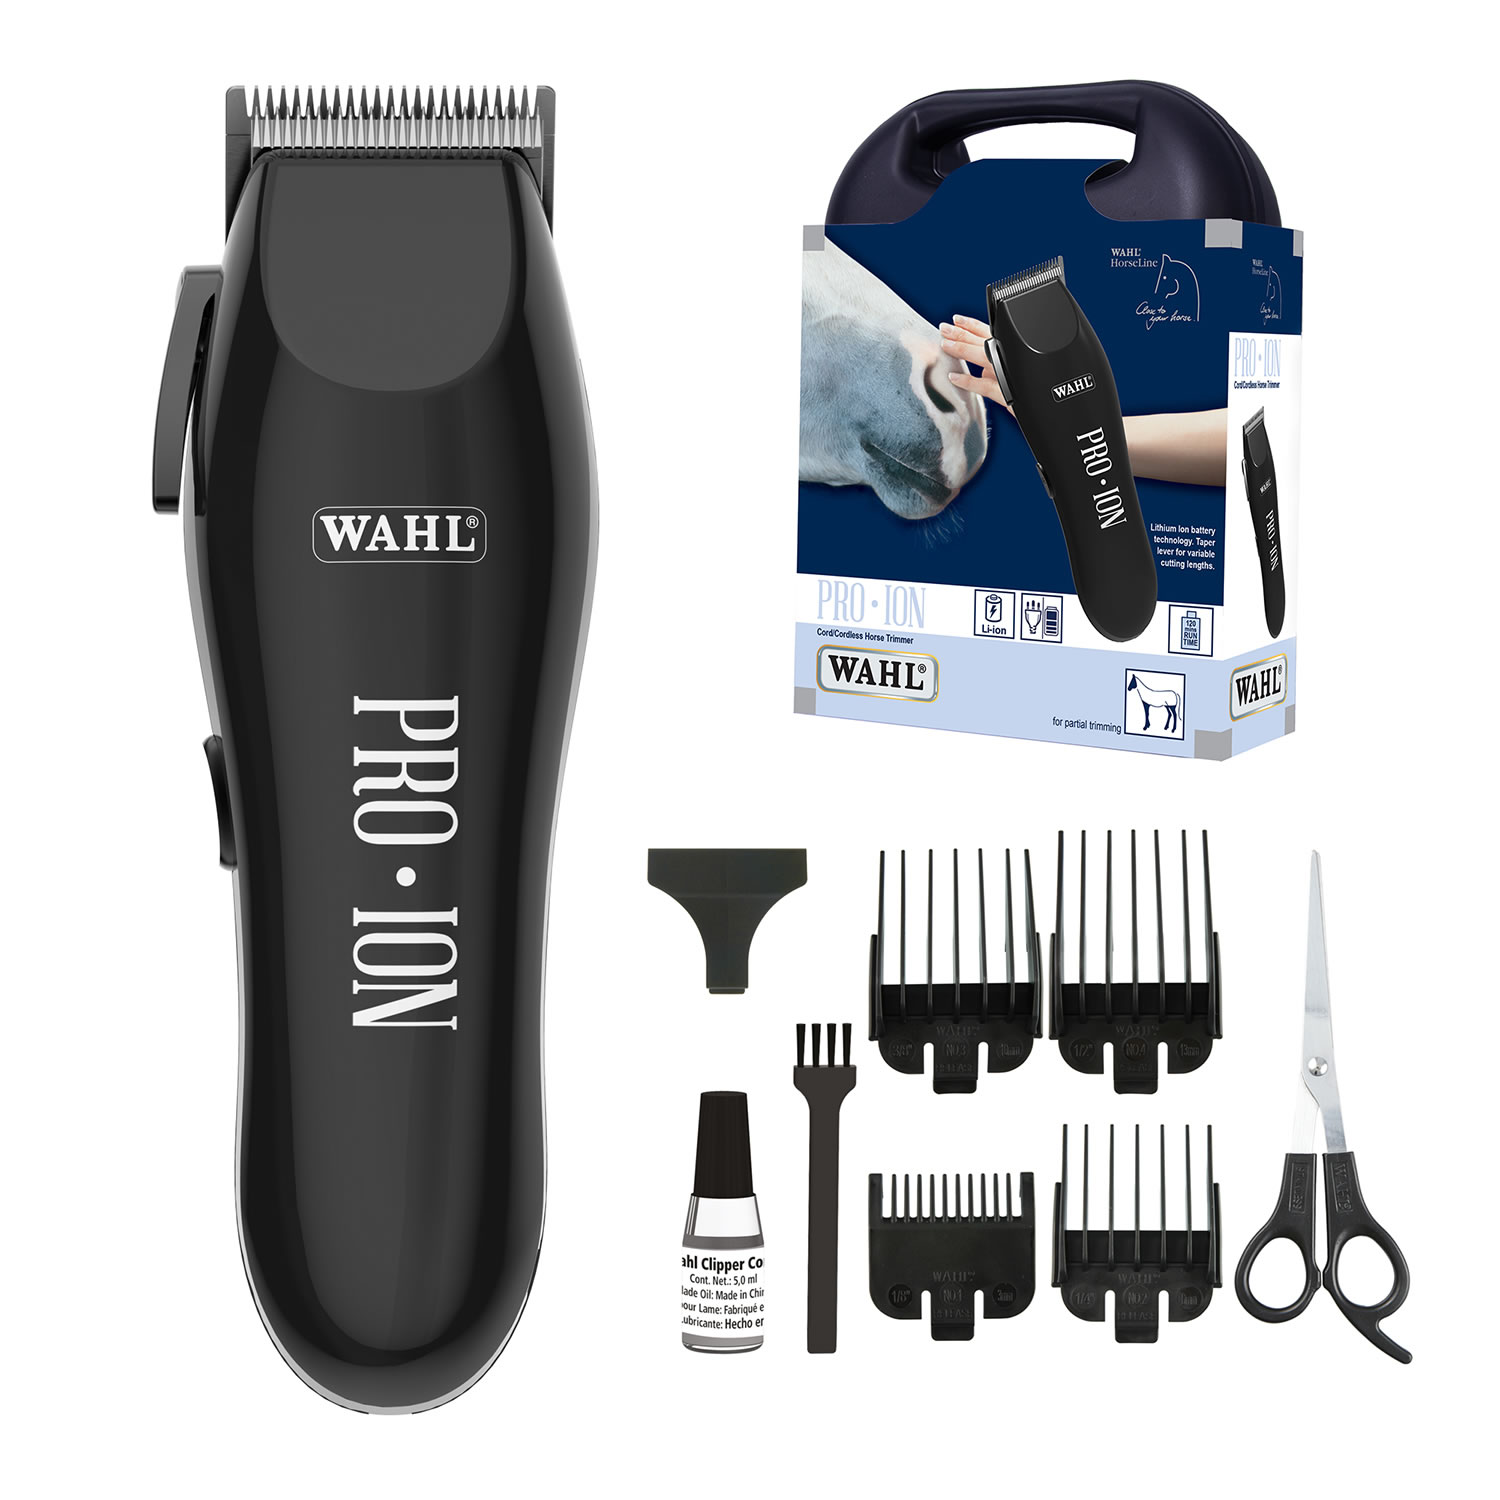 Wahl Pro Ion Equine Cord/Cordless Trimmer Kit